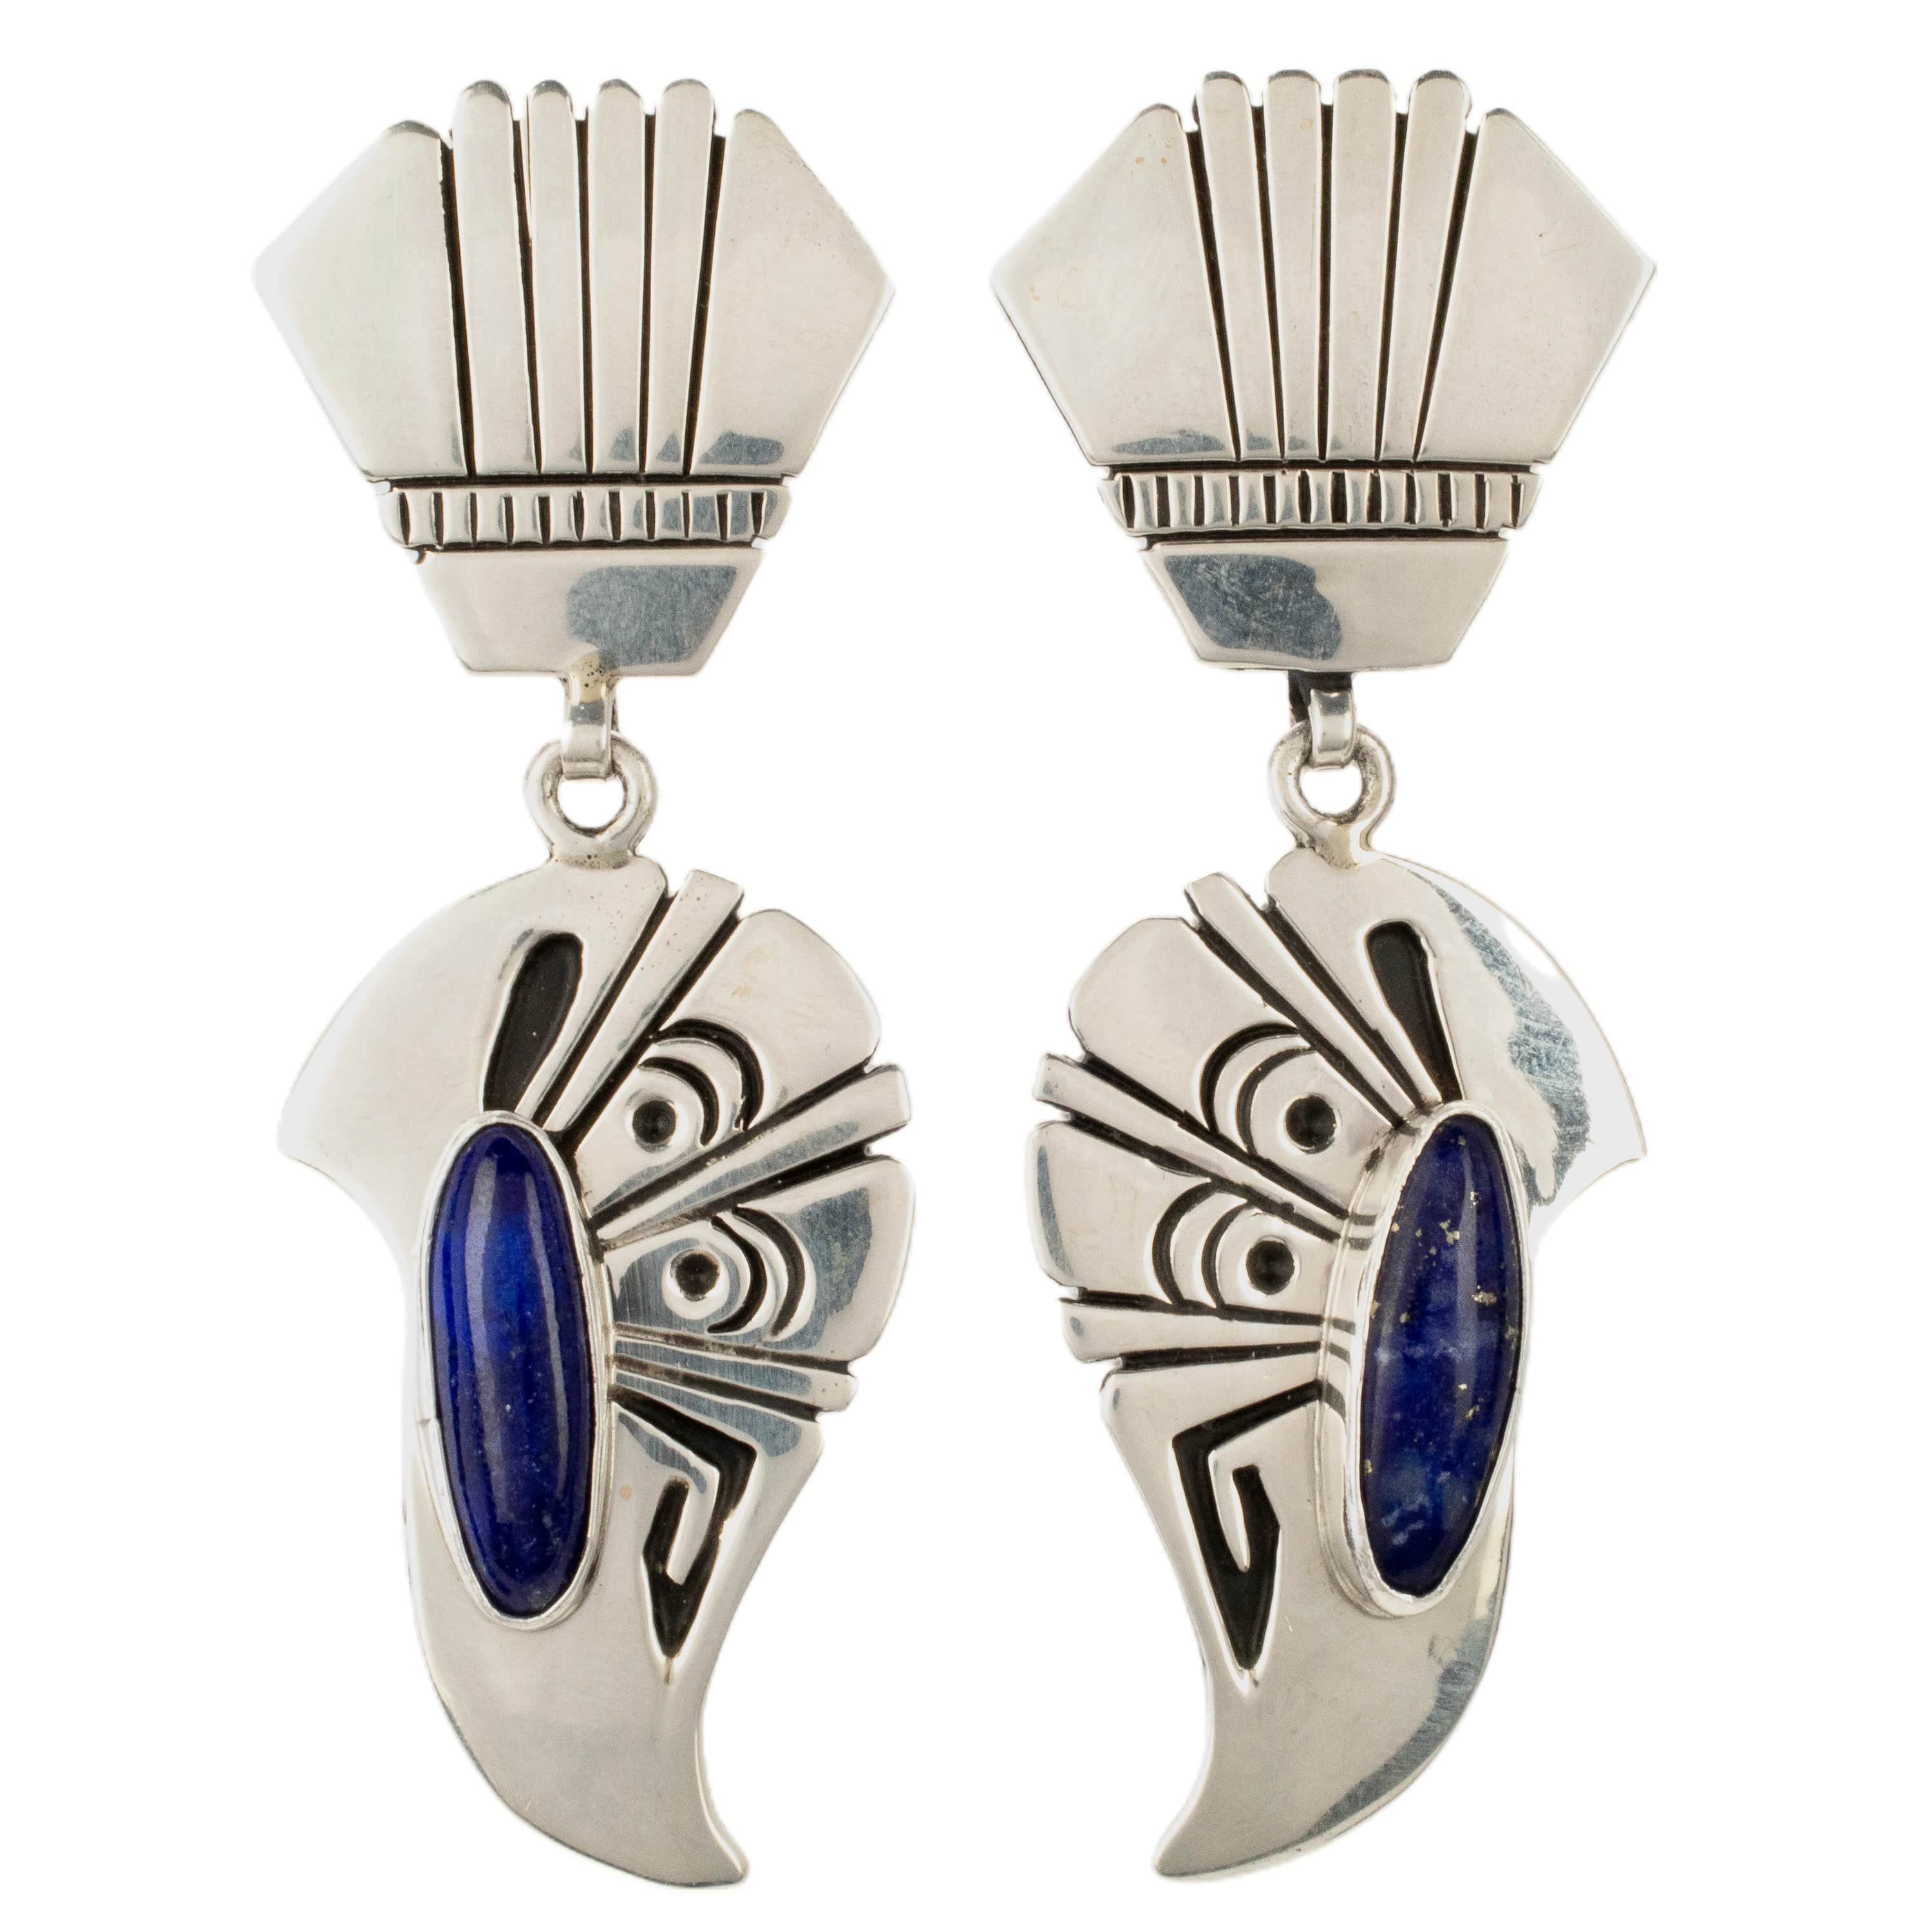 Kalifano Native American Jewelry Nelson Begay Navajo Lapis USA Native American Made 925 Sterling Silver Dangly Earrings with Stud Backing NAE1600.001